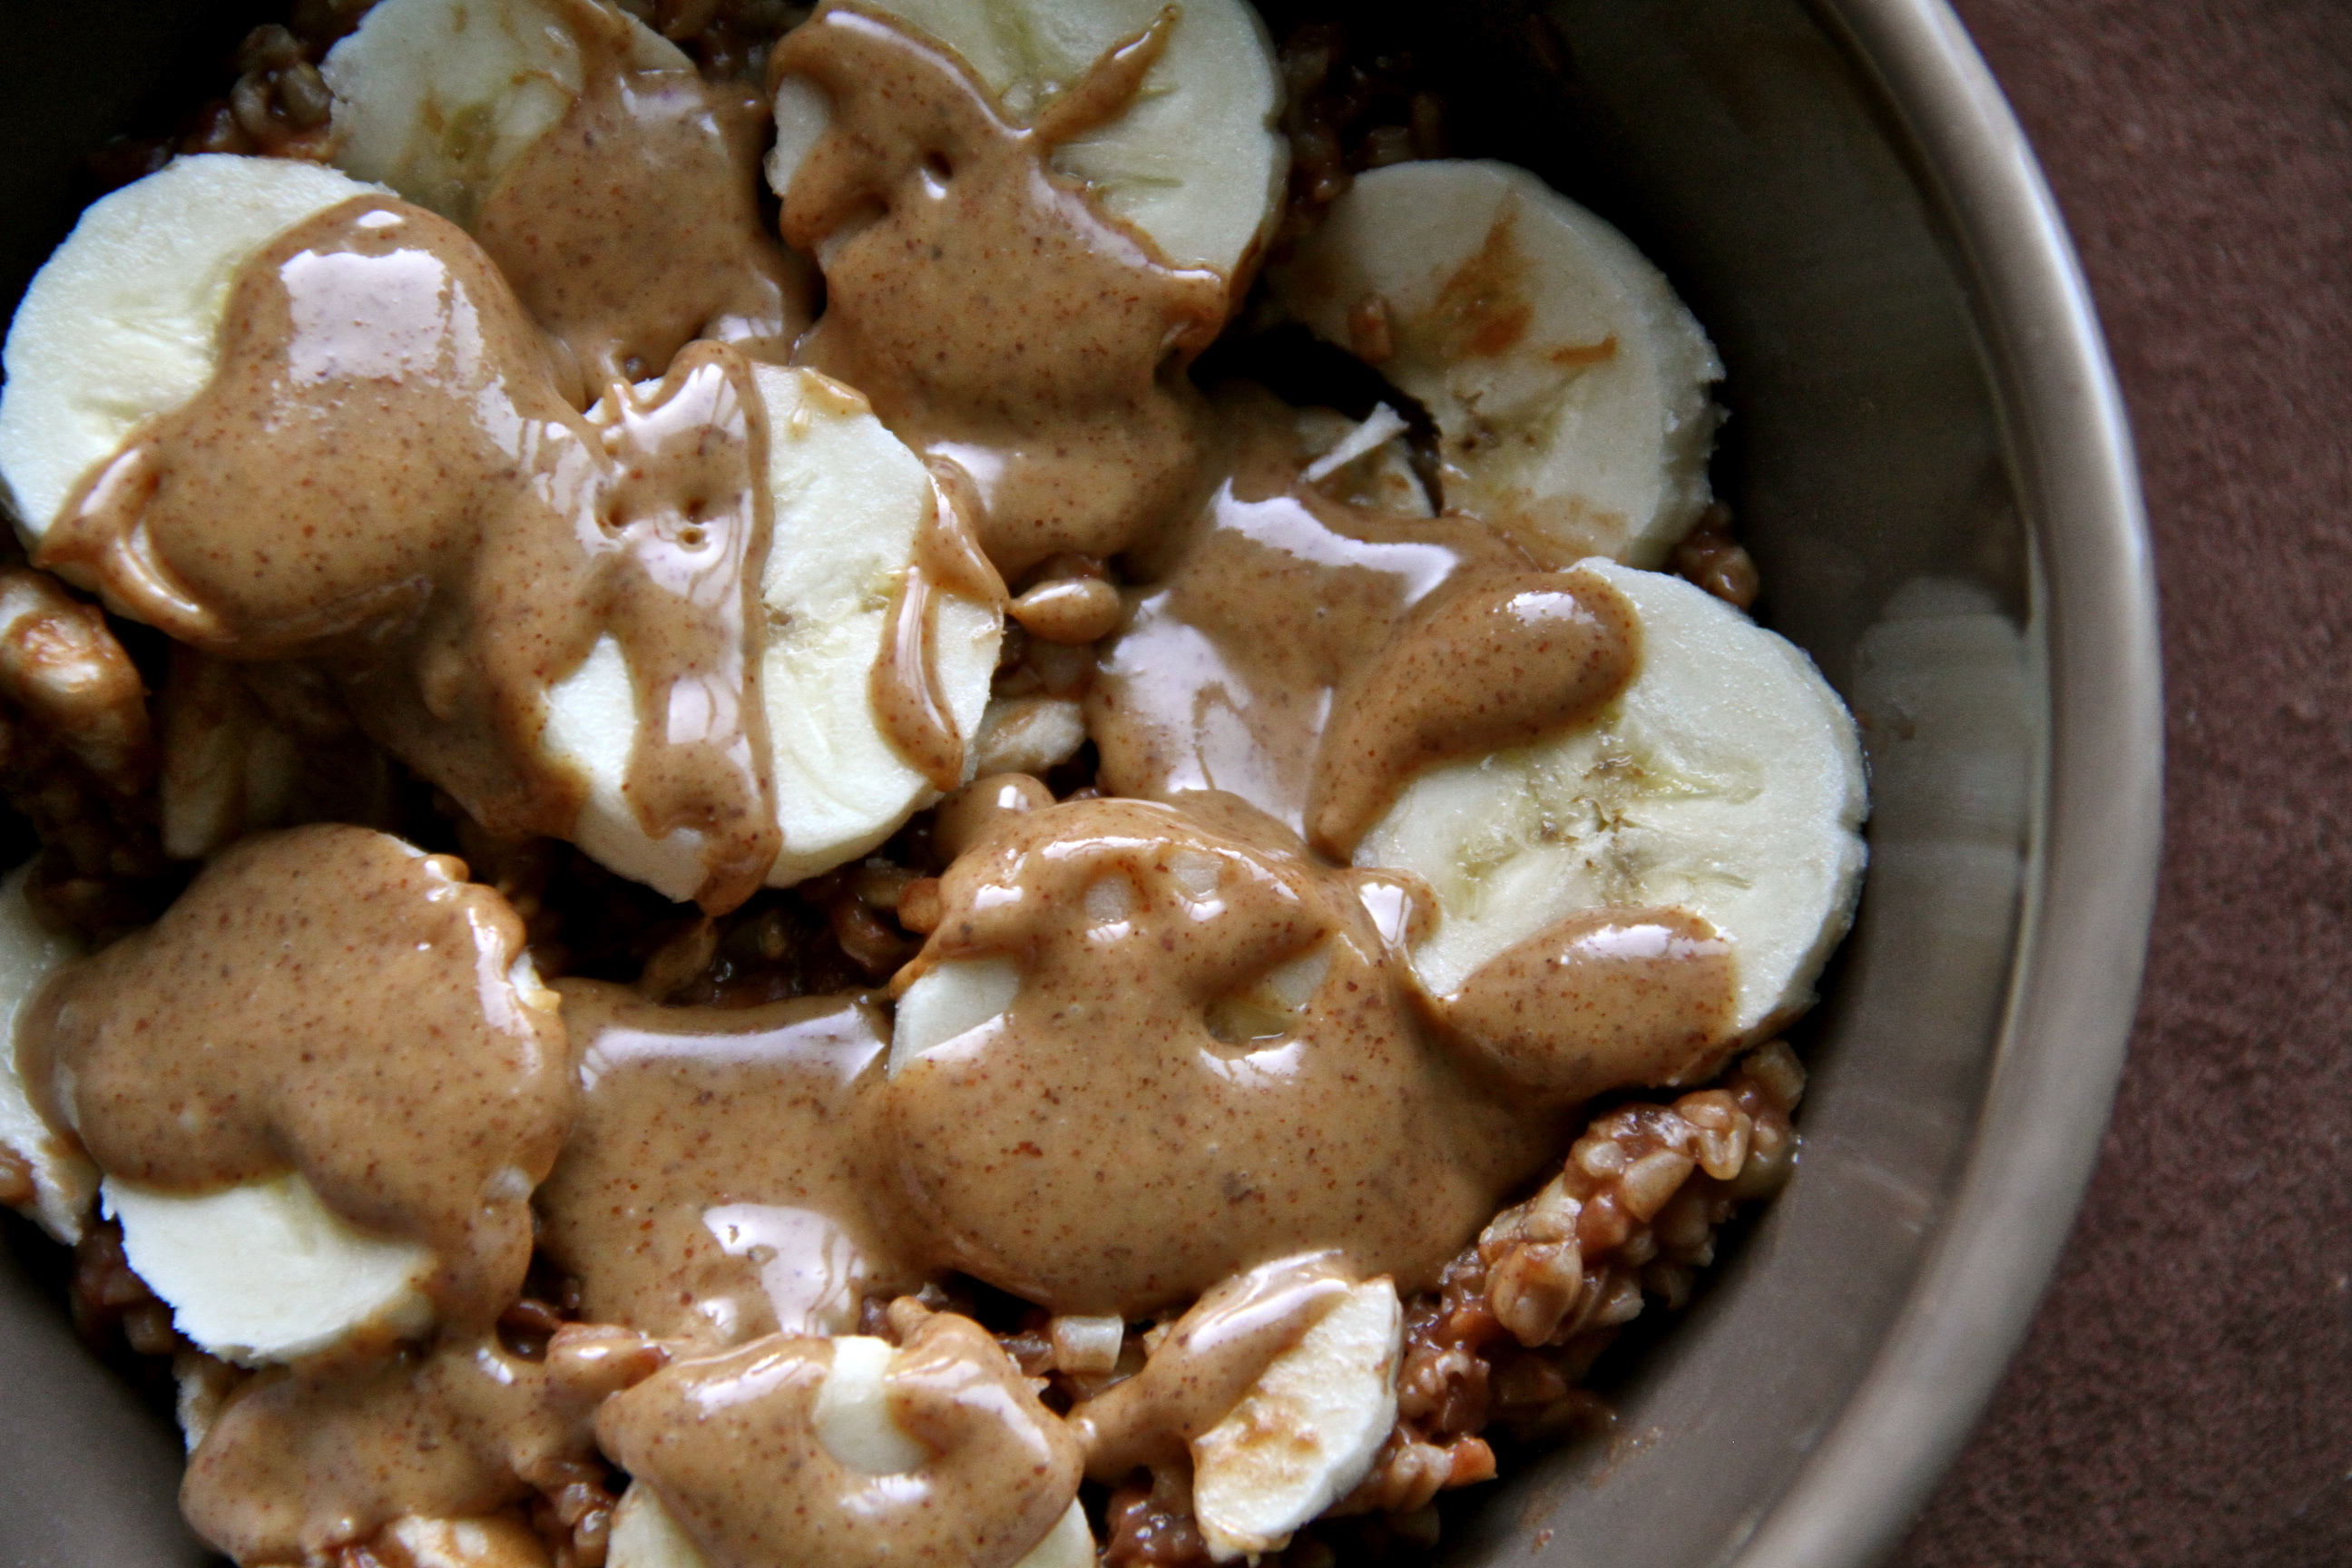 Almond Butter and Bananas